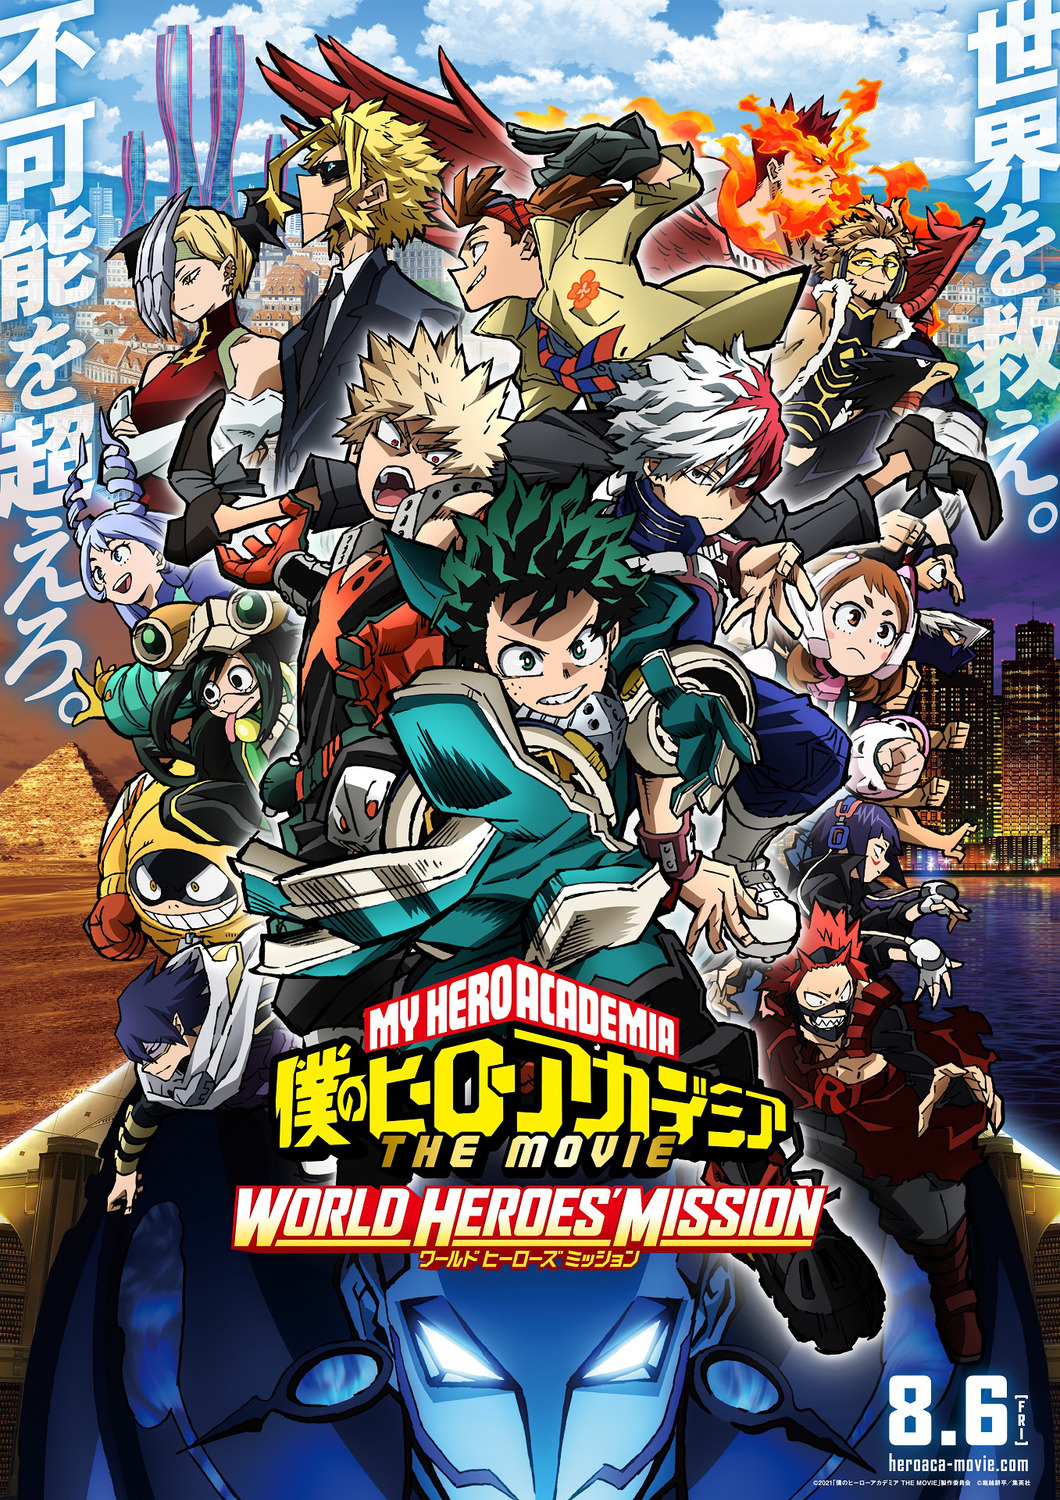 Extra Large Movie Poster Image for Boku no Hero Academia: World Heroes Mission (#1 of 2)